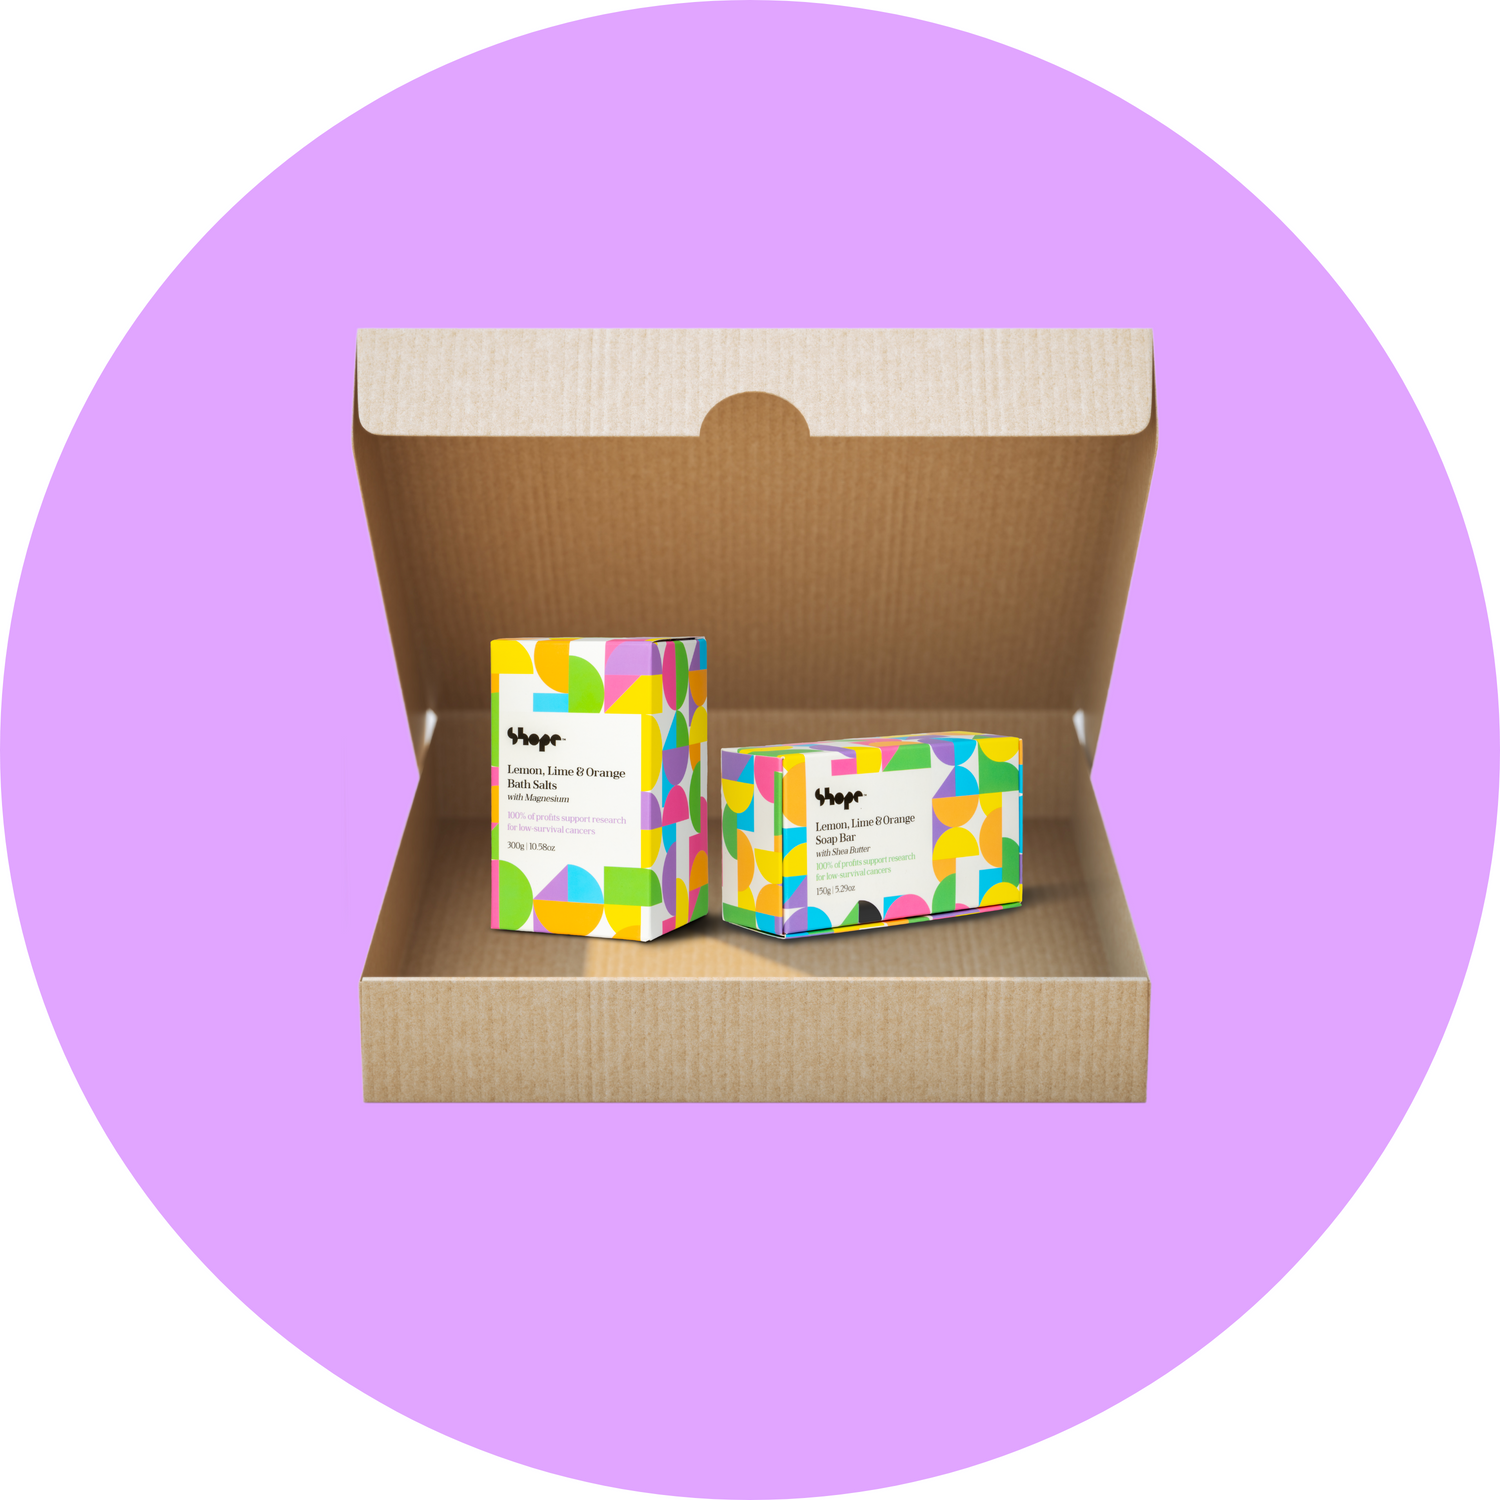 Boxed SHOPE lemon lime and orange bath salts and soap bar, inside brown shipping box with purple circle background.